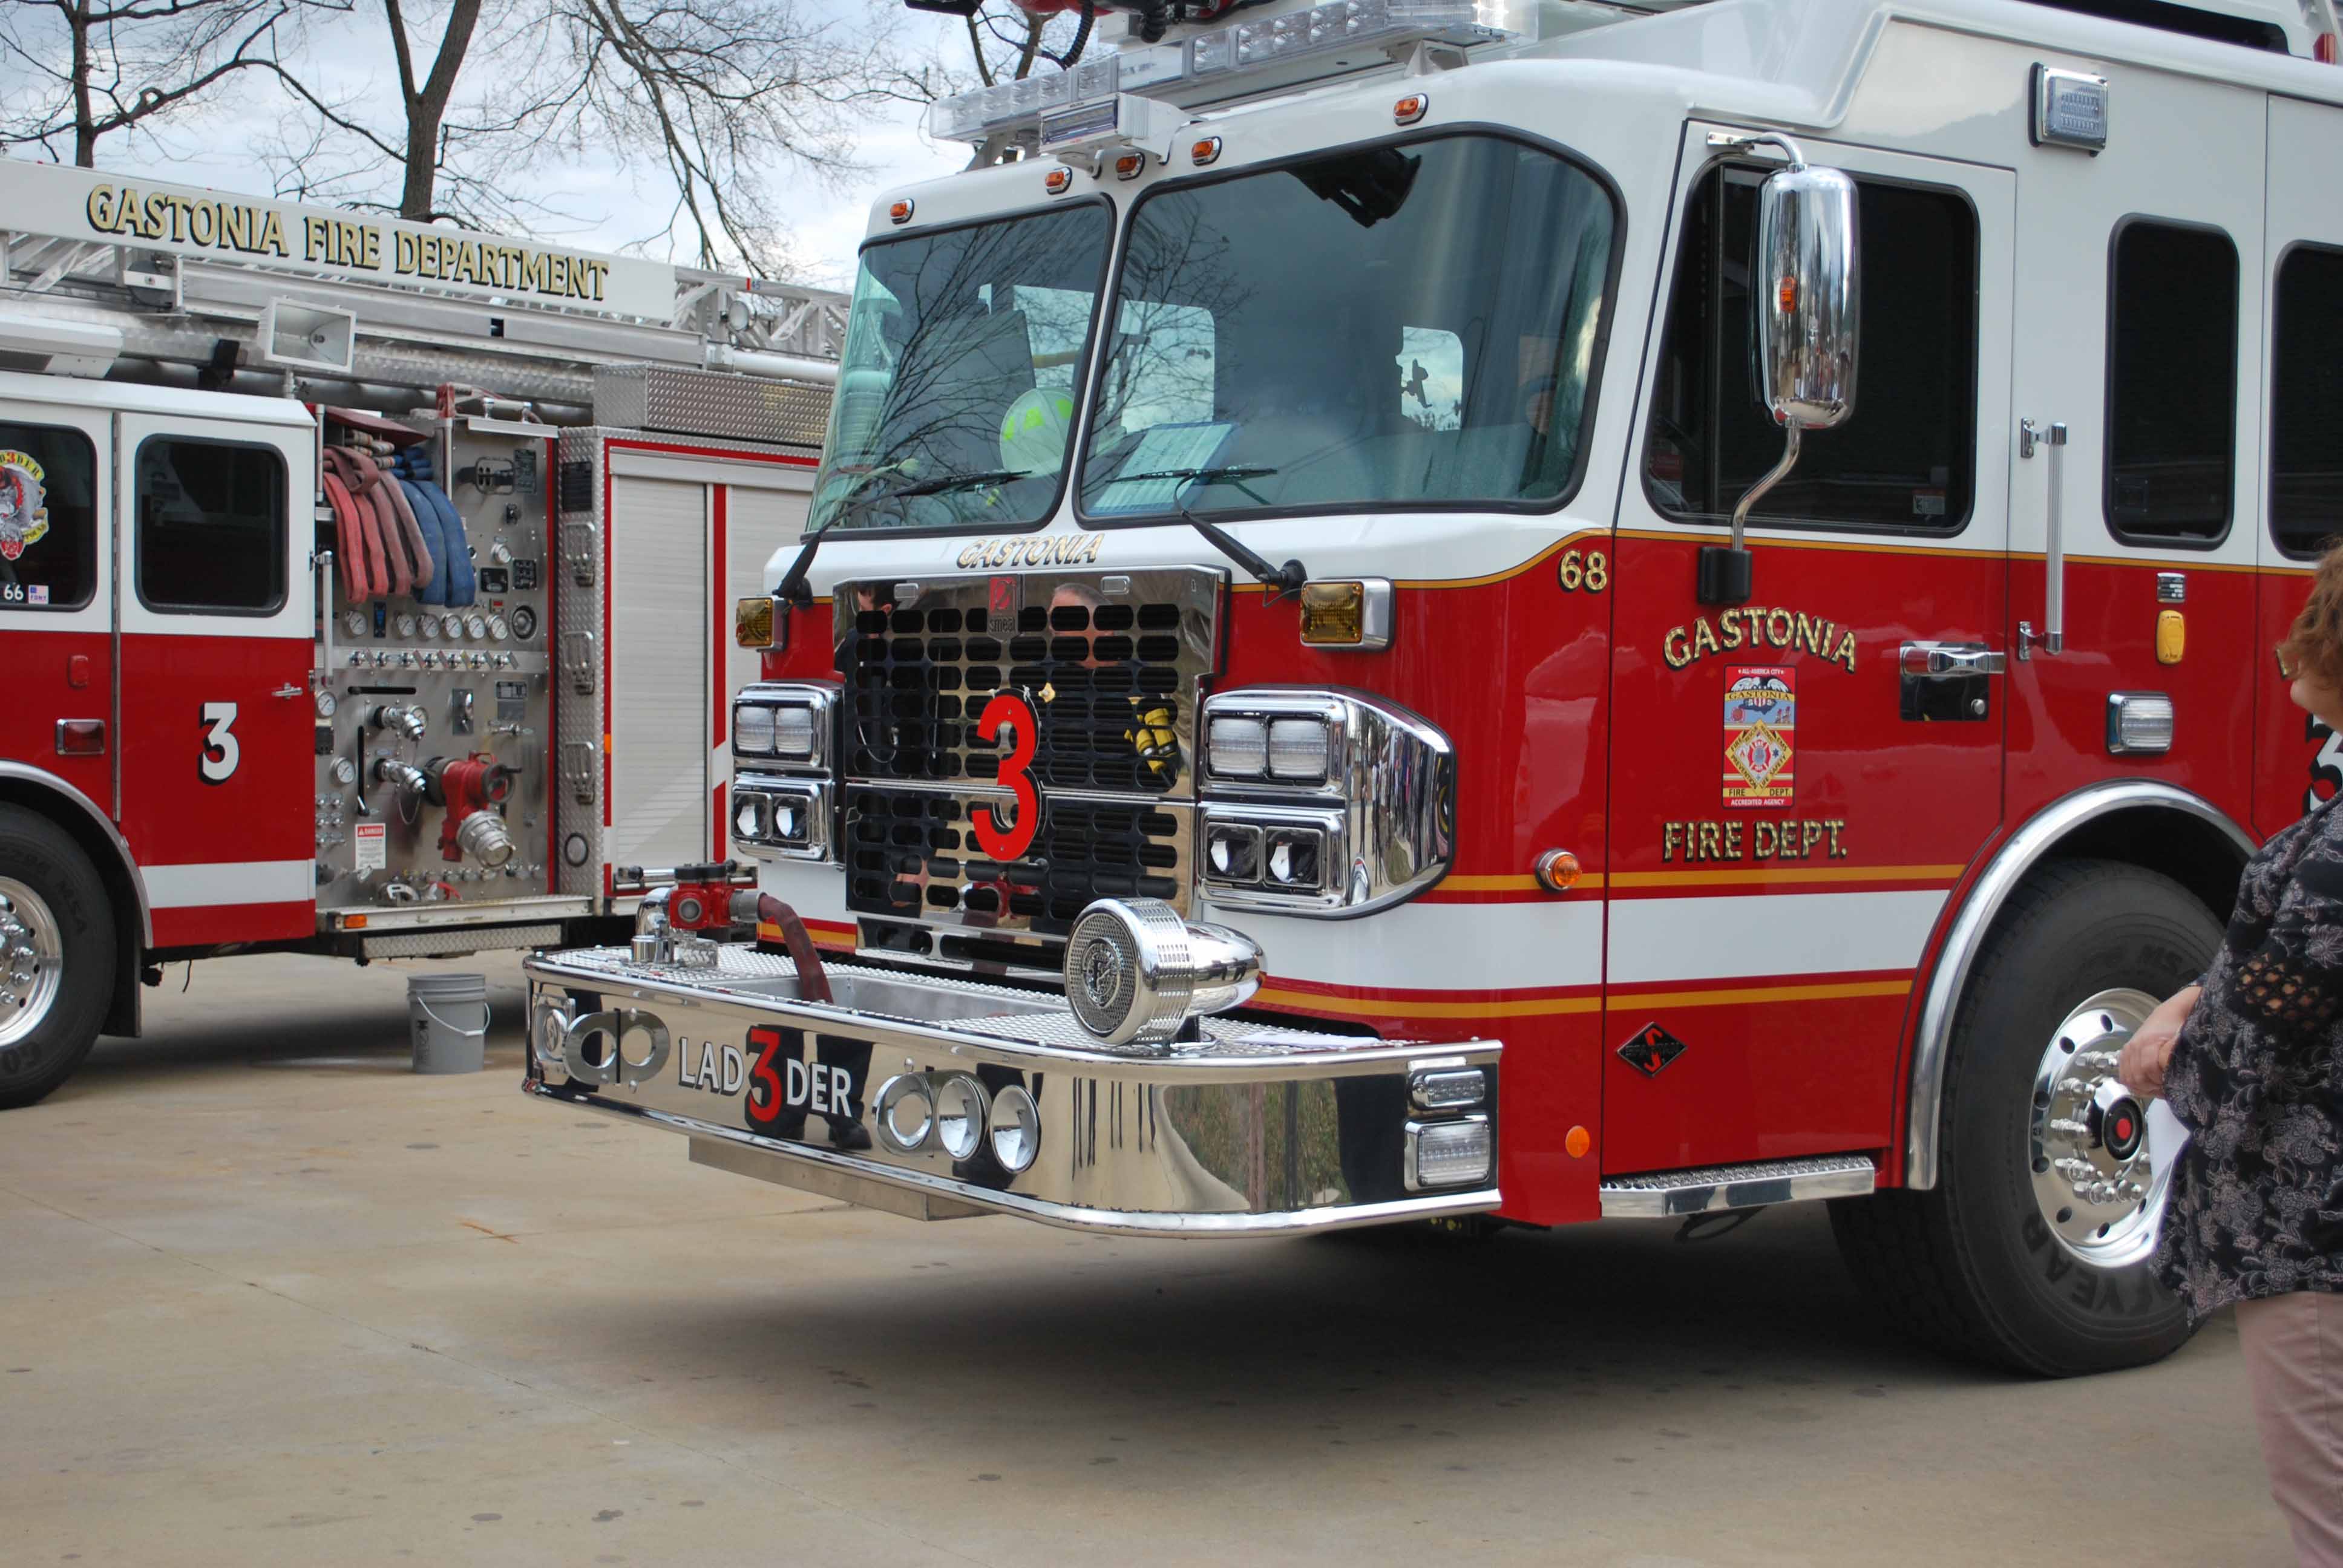 Front of new fire truck with #3 on engine grill